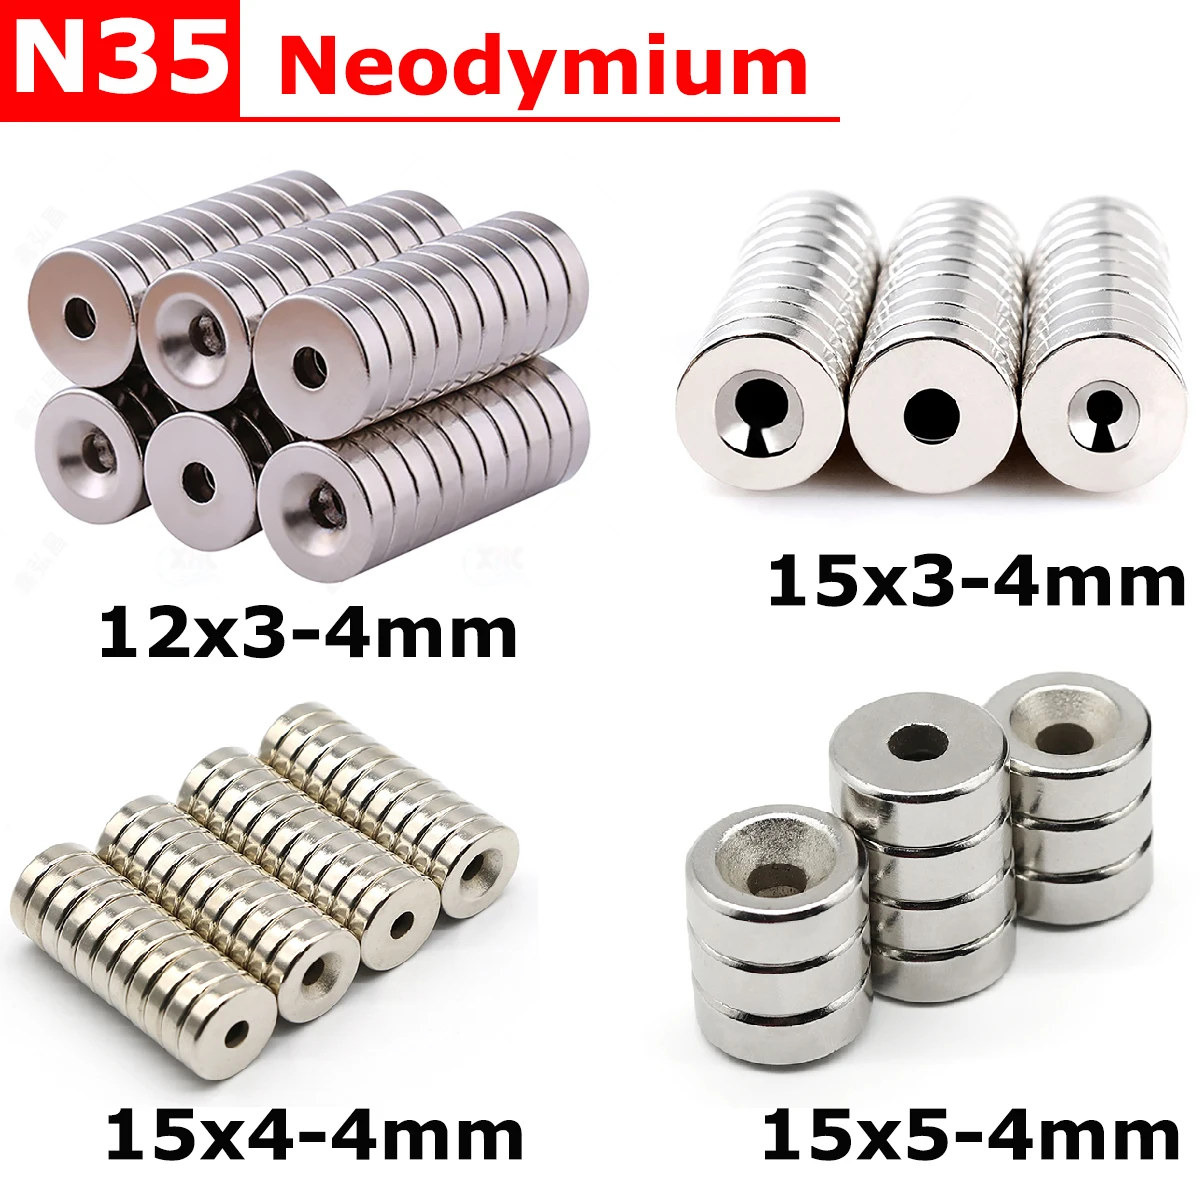 

12x3 15x3 15x4 15x5 Hole 4mm Neodymium Magnet N35 NdFeB Countersunk Round Magnet Powerful Strong Permanent Magnetic imane Disc